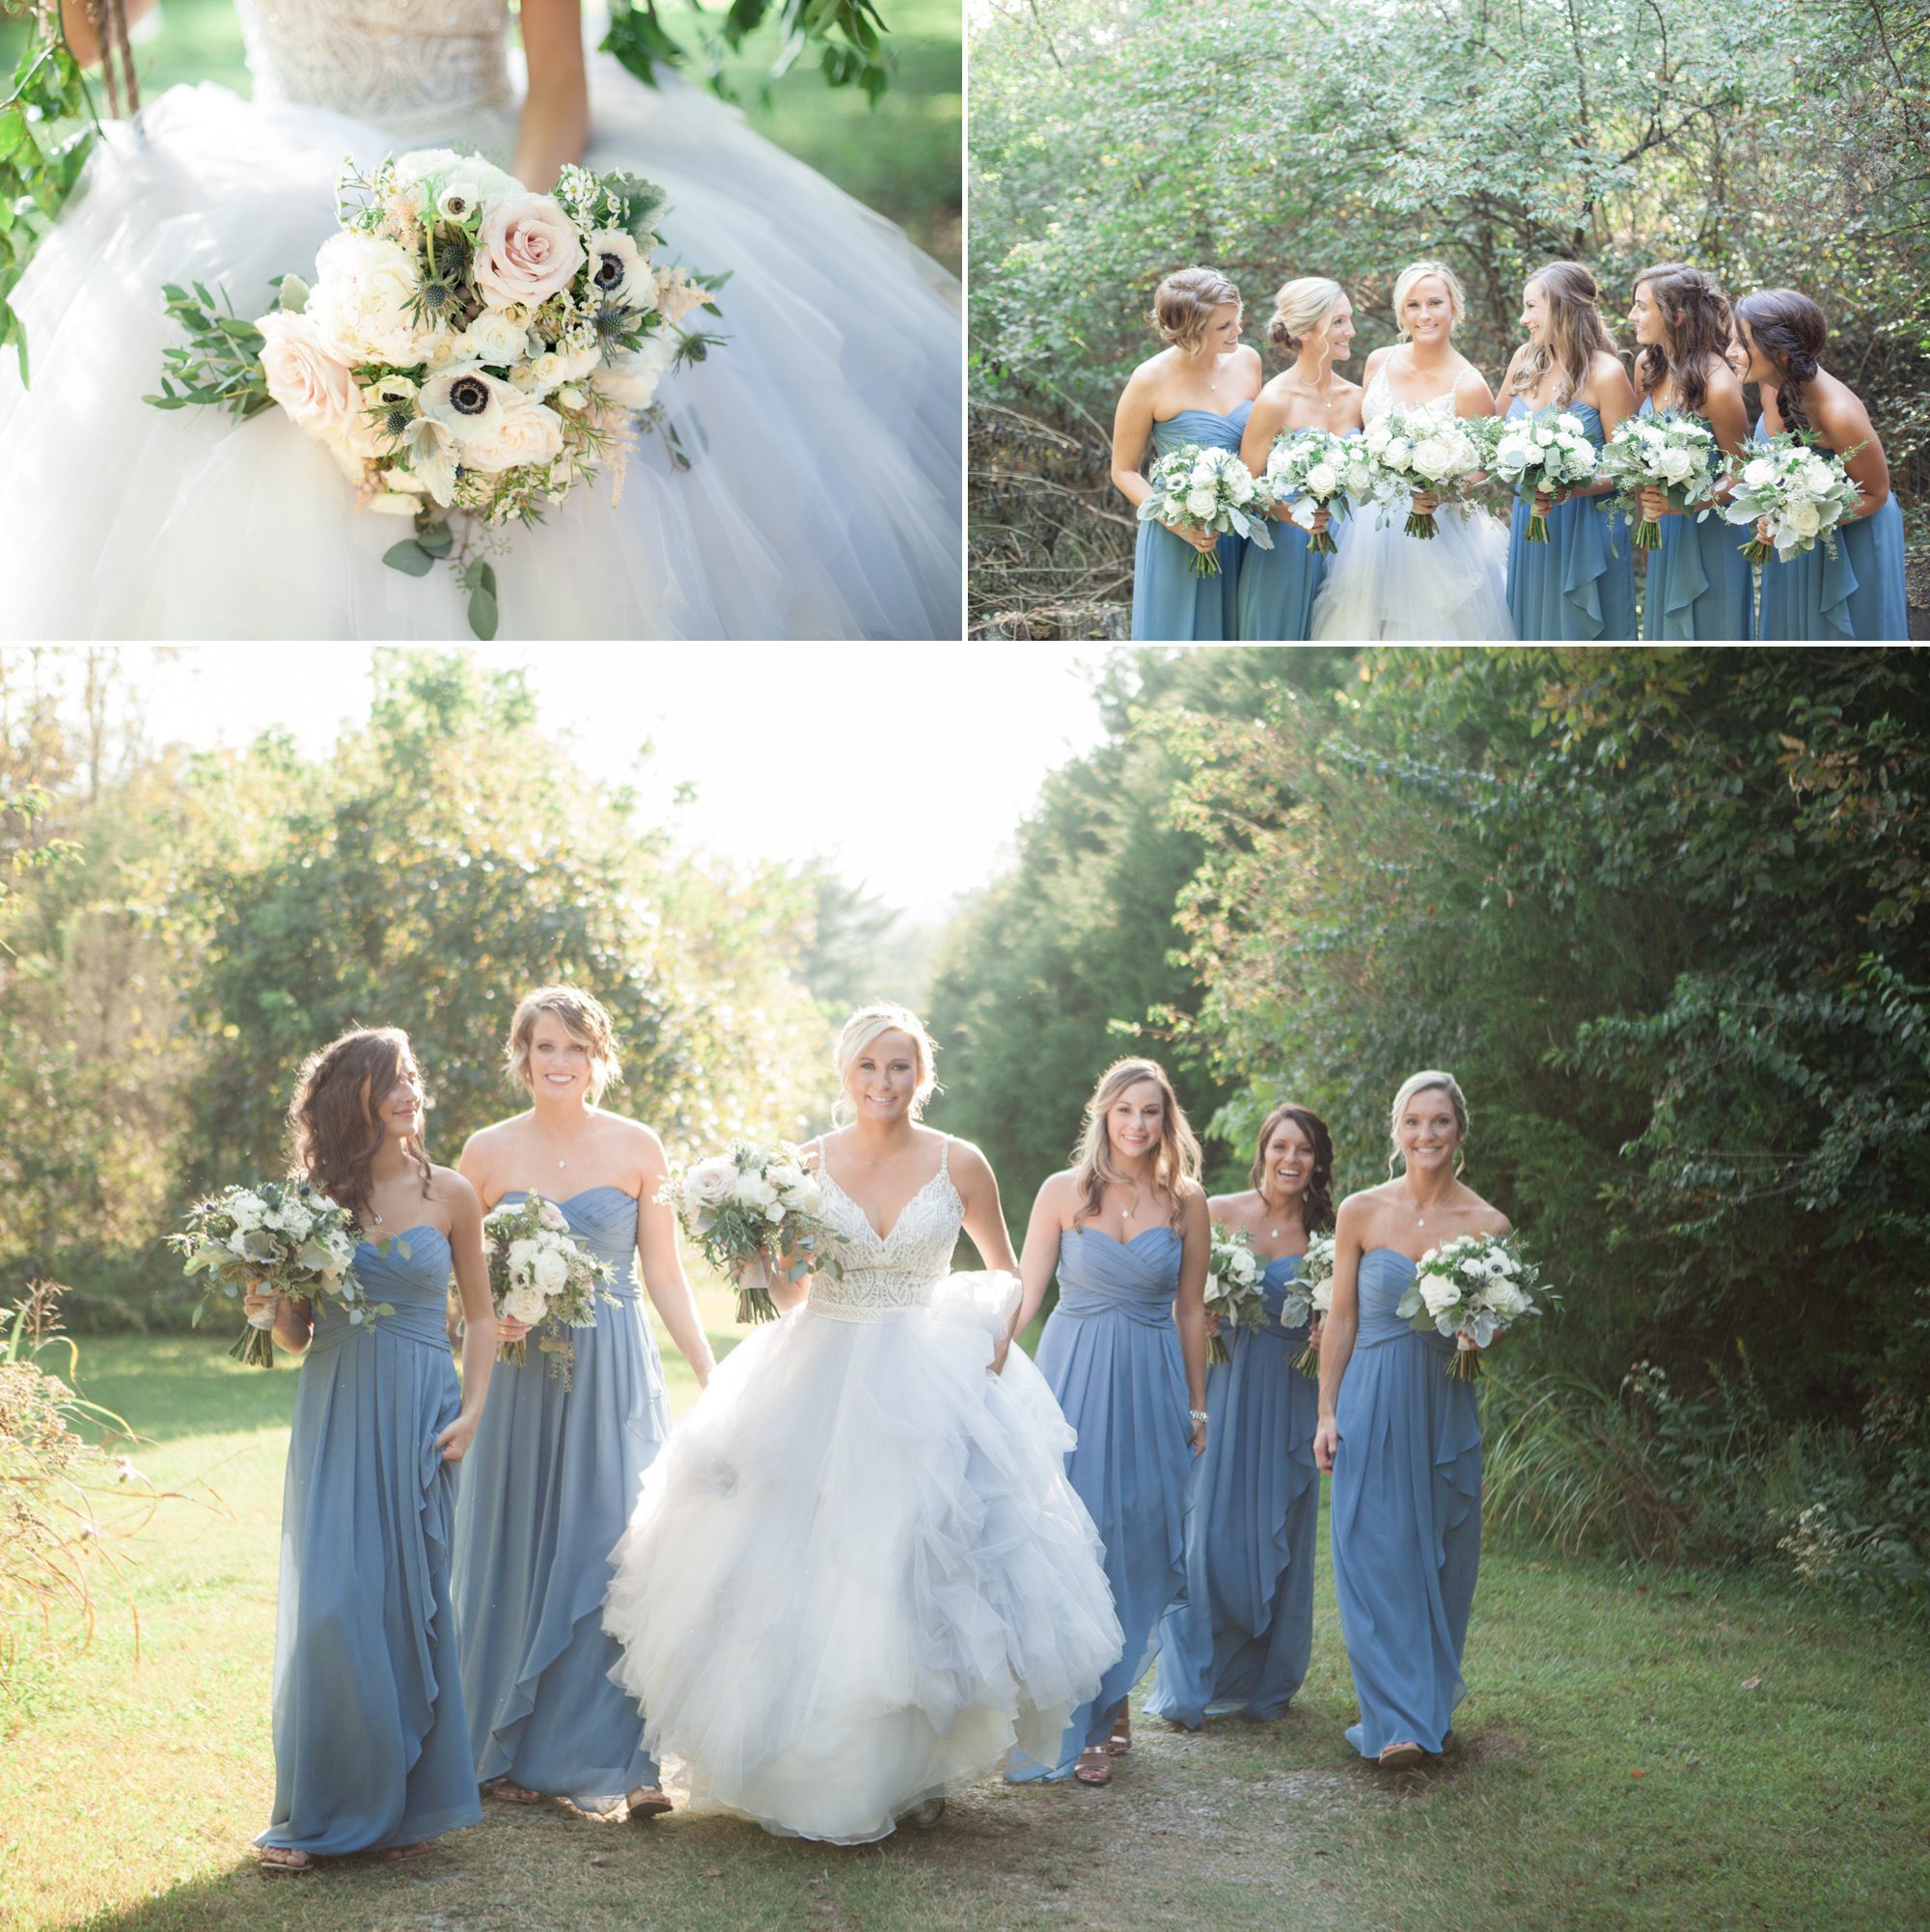 Bridesmaids before wedding ceremony. Wedding photography at Cedarwood Weddings and Estate in Nashville, TN photography by Krista Lee Photography